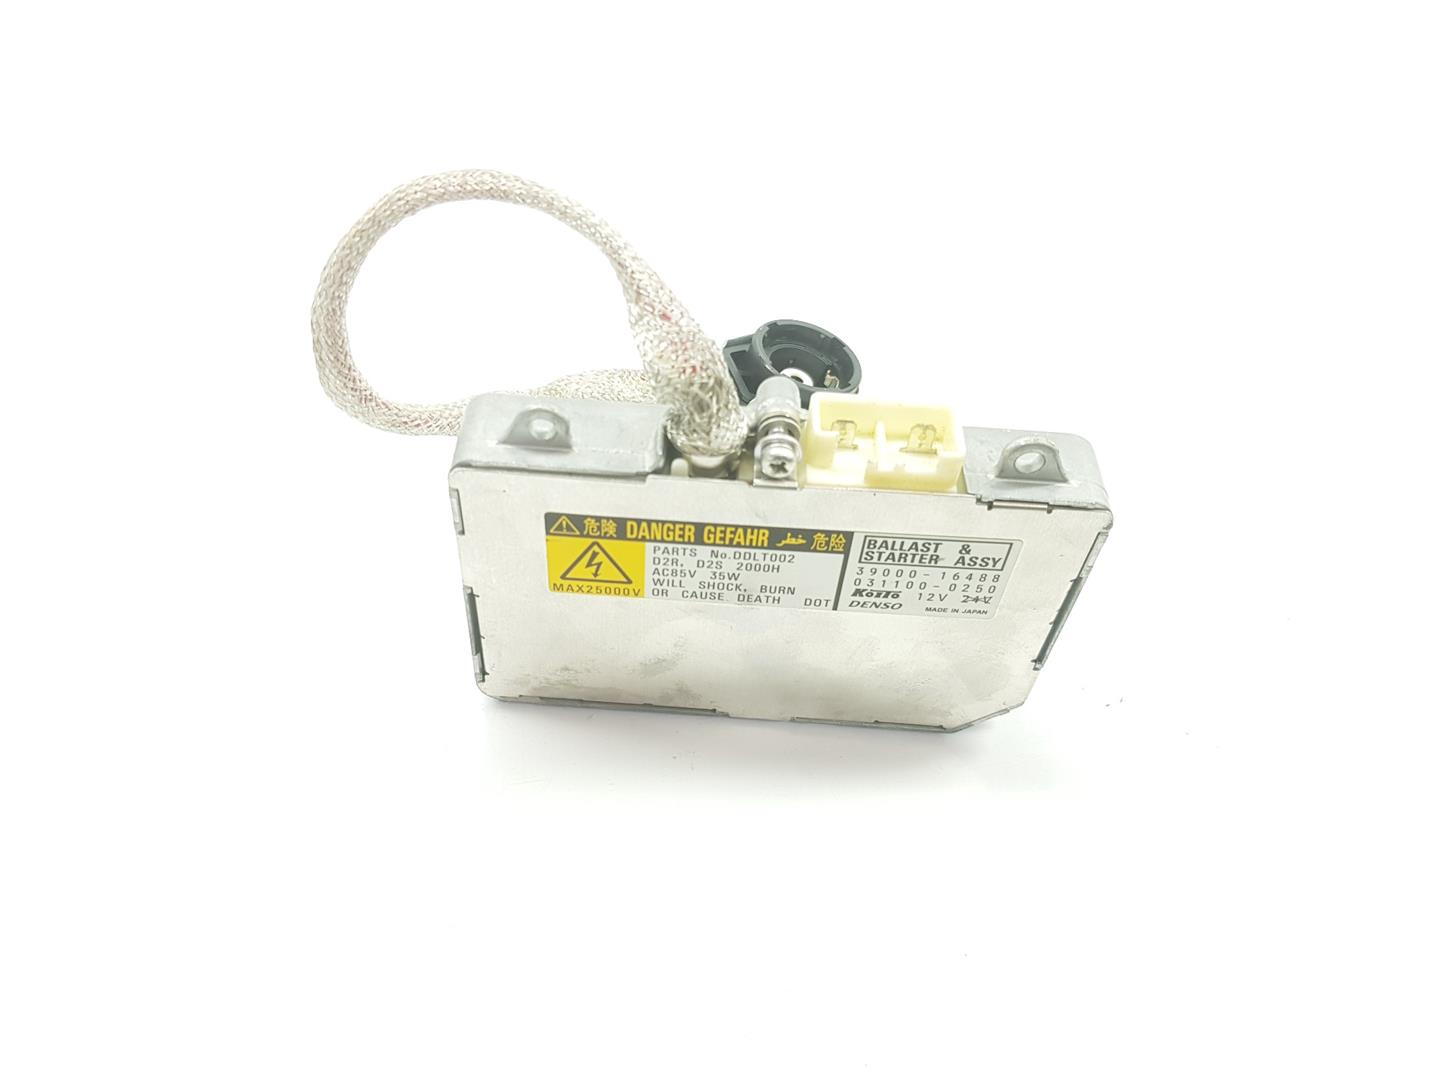 LAND ROVER Discovery 3 generation (2004-2009) Xenon Light Control Unit 3900016488, 3900016488 24145619